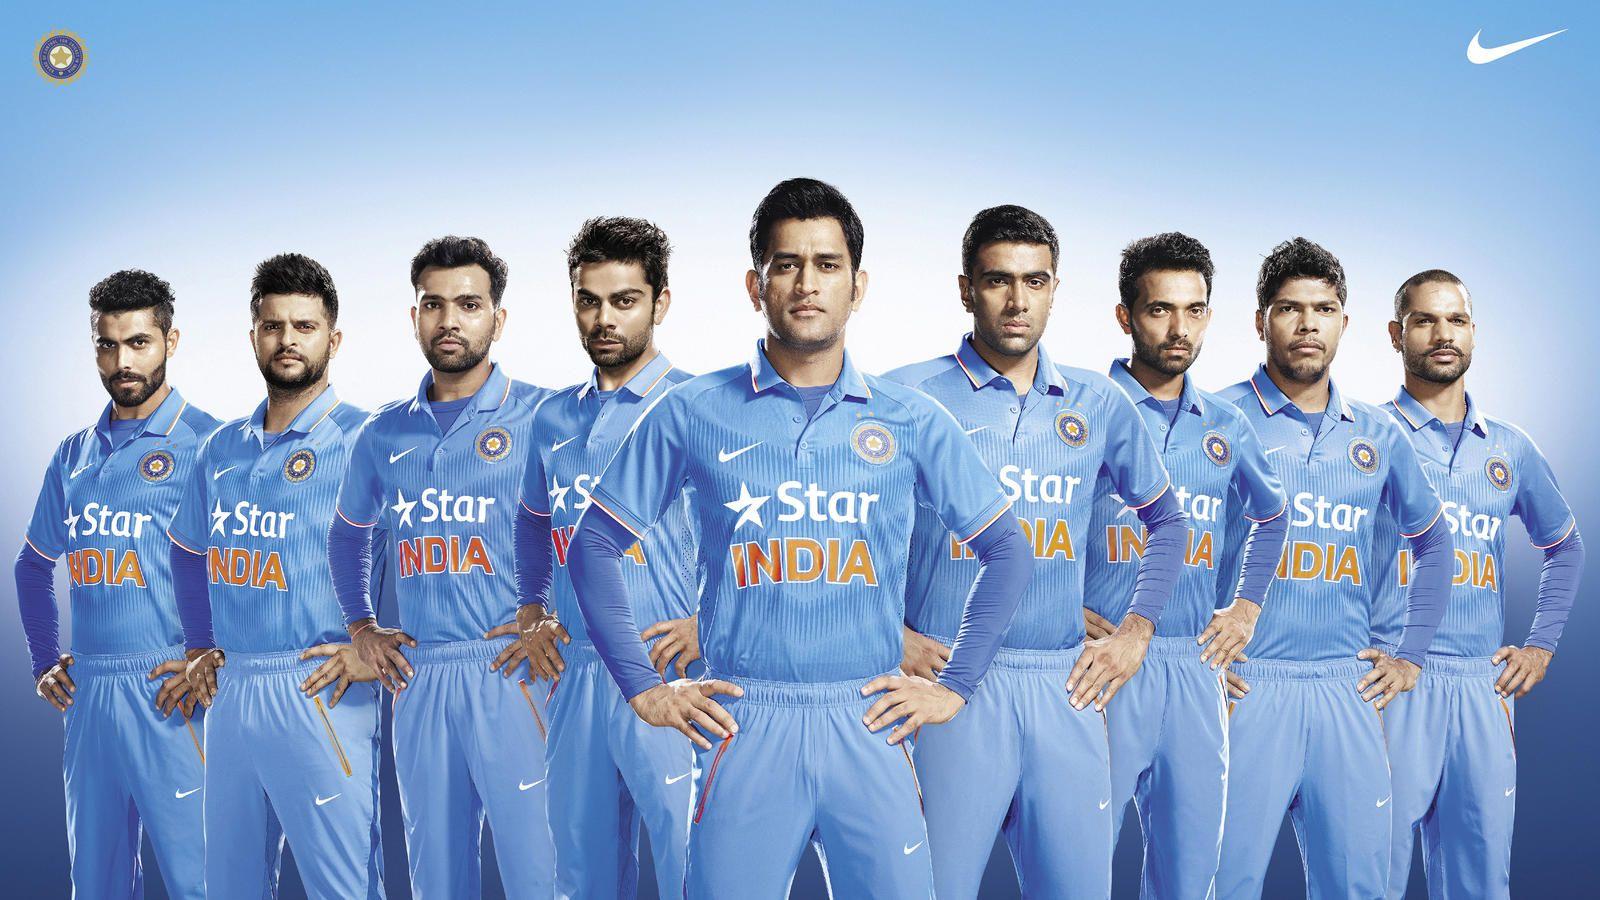 indian cricket team player photo HD download. India cricket team, Cricket teams, Team wallpaper